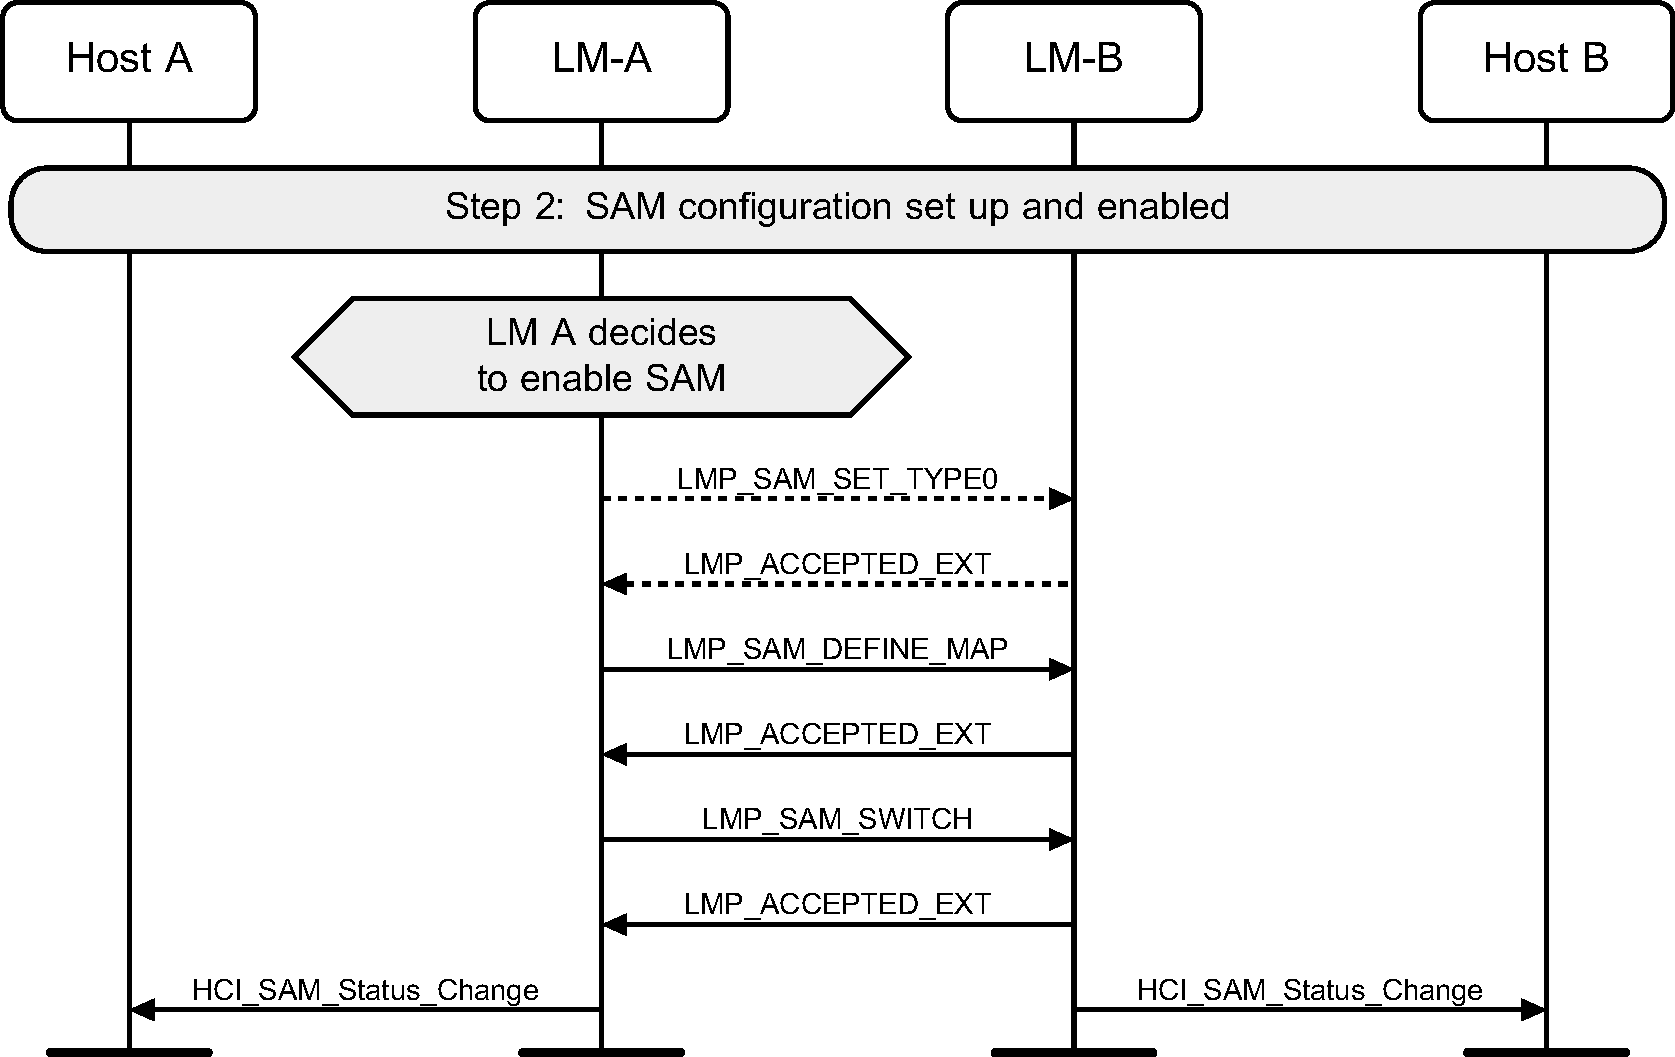 SAM configuration transmitted to device B